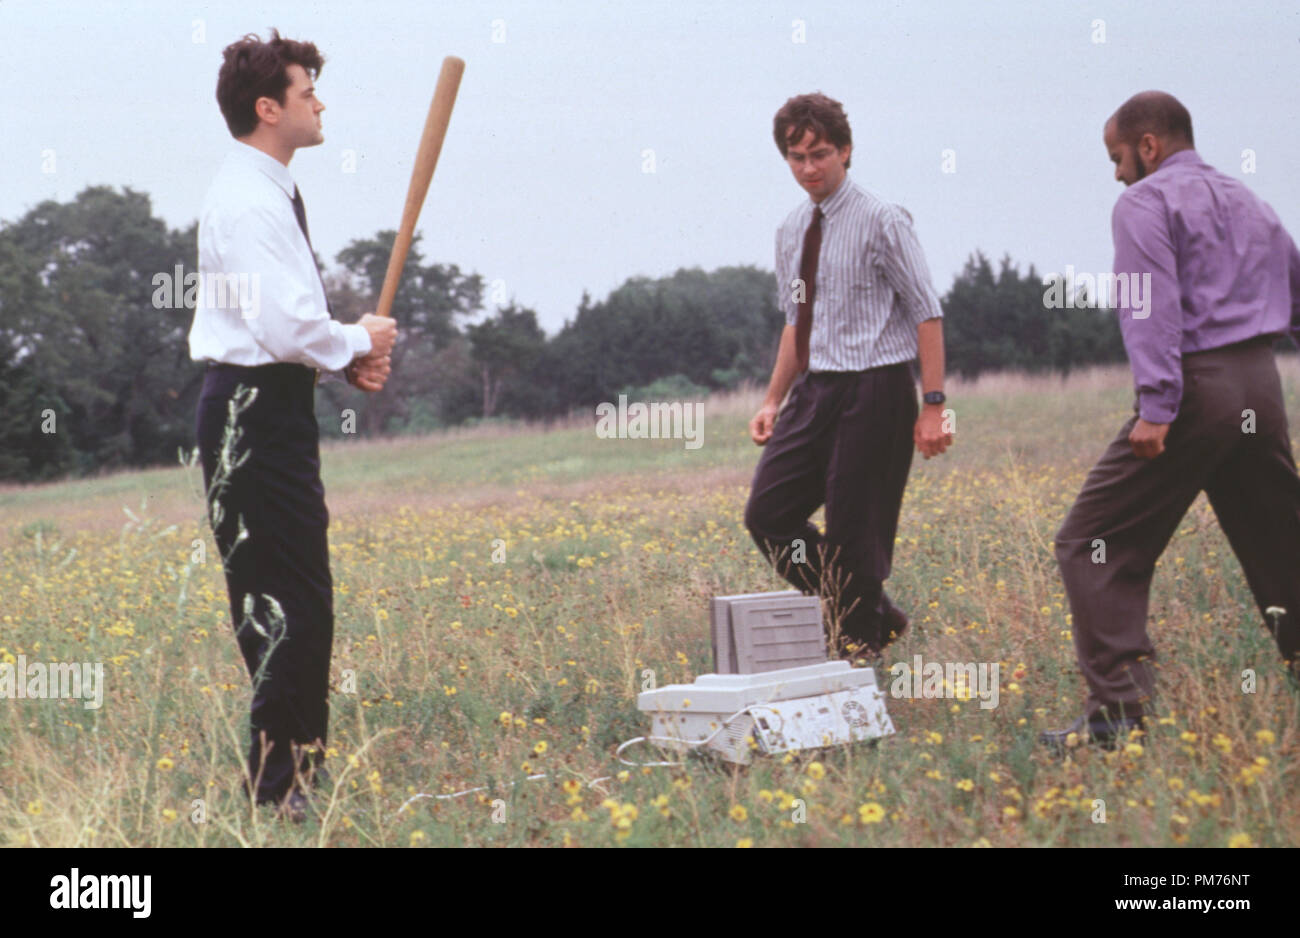 Film Still / Publicity Still from 'Office Space' Ron Livingston, David Herman, Ajay Naidu © 1999 20th Century Fox Photo Credit: Alan Pappe   File Reference # 30973502THA  For Editorial Use Only -  All Rights Reserved Stock Photo